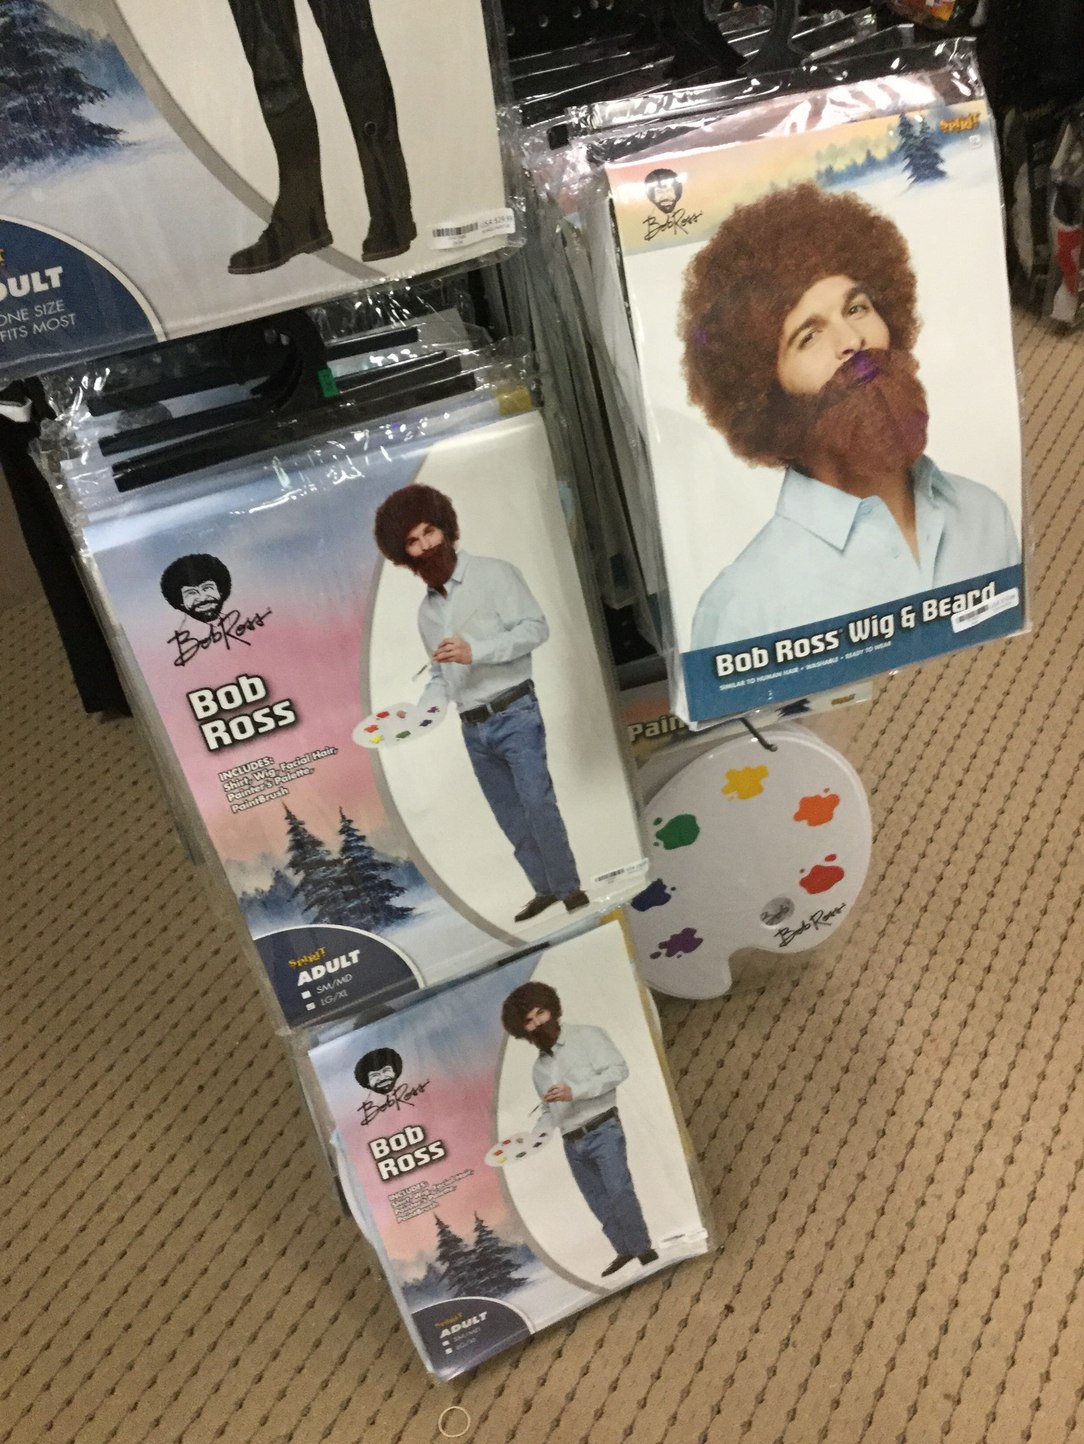 Truly an costume worthy of only god himself - meme